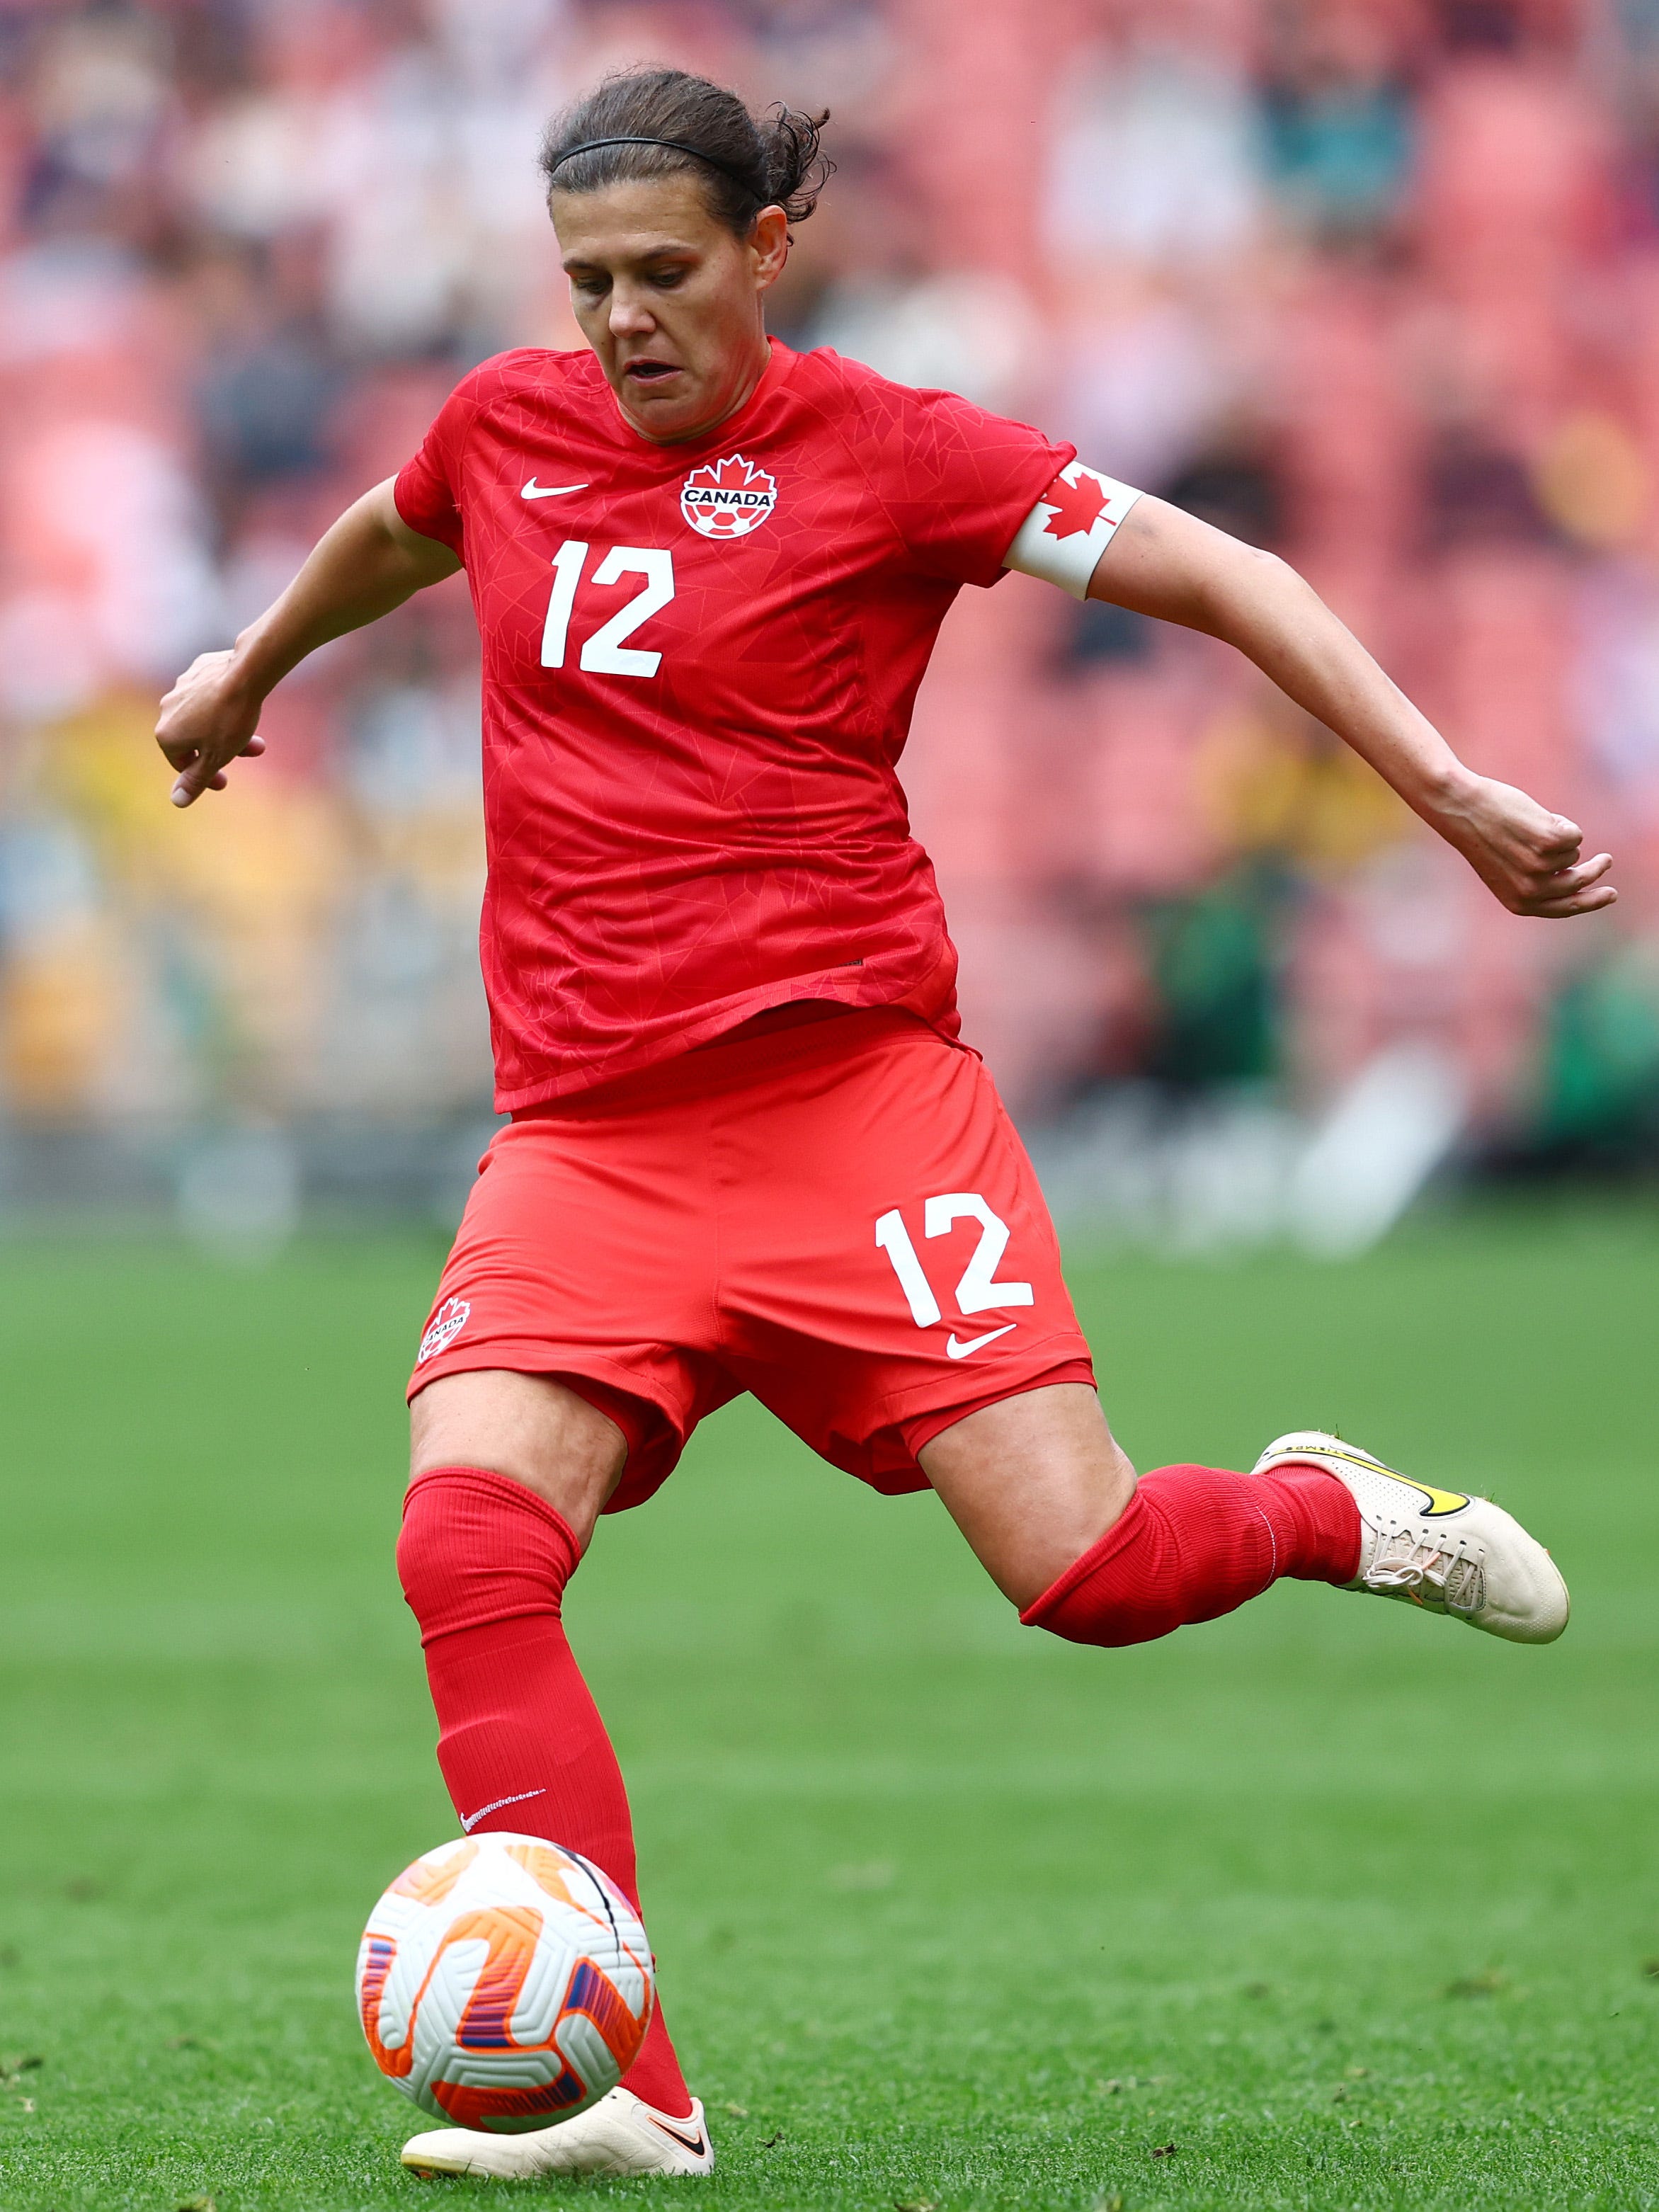 An action image of Christine Sinclair playing soccer.